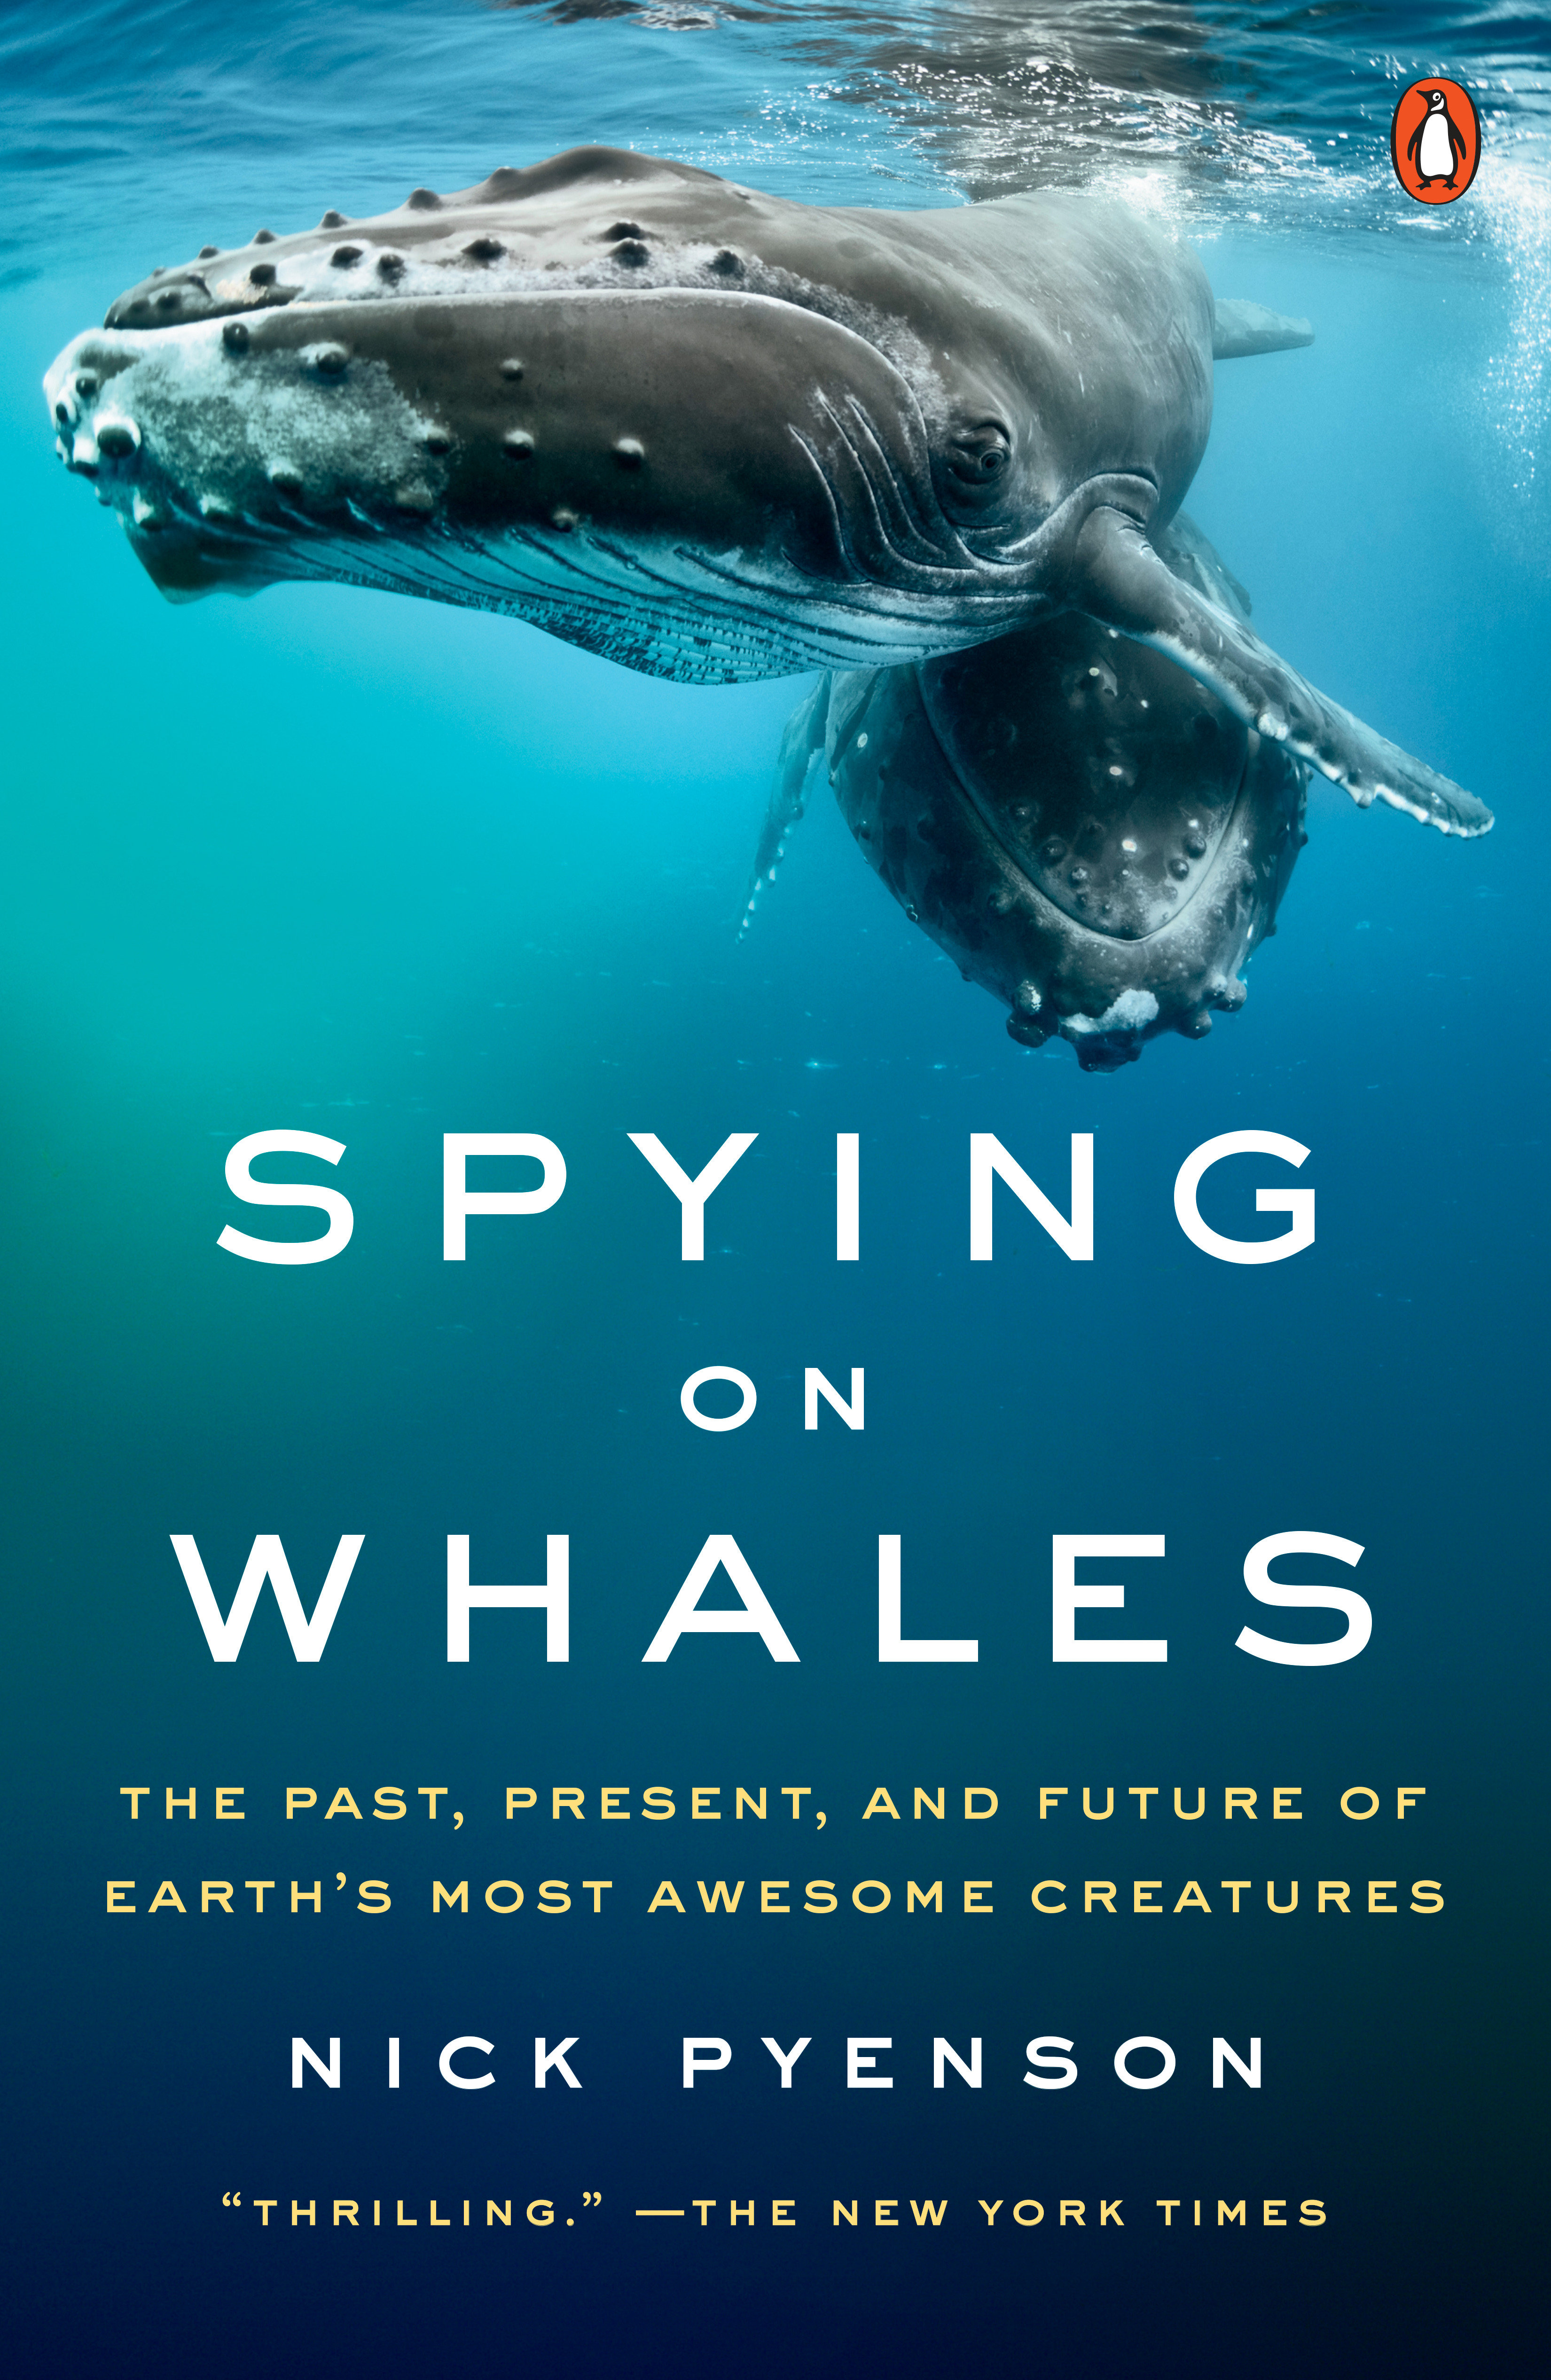 Spying on whales the past, present, and future of earth's most awesome creatures cover image